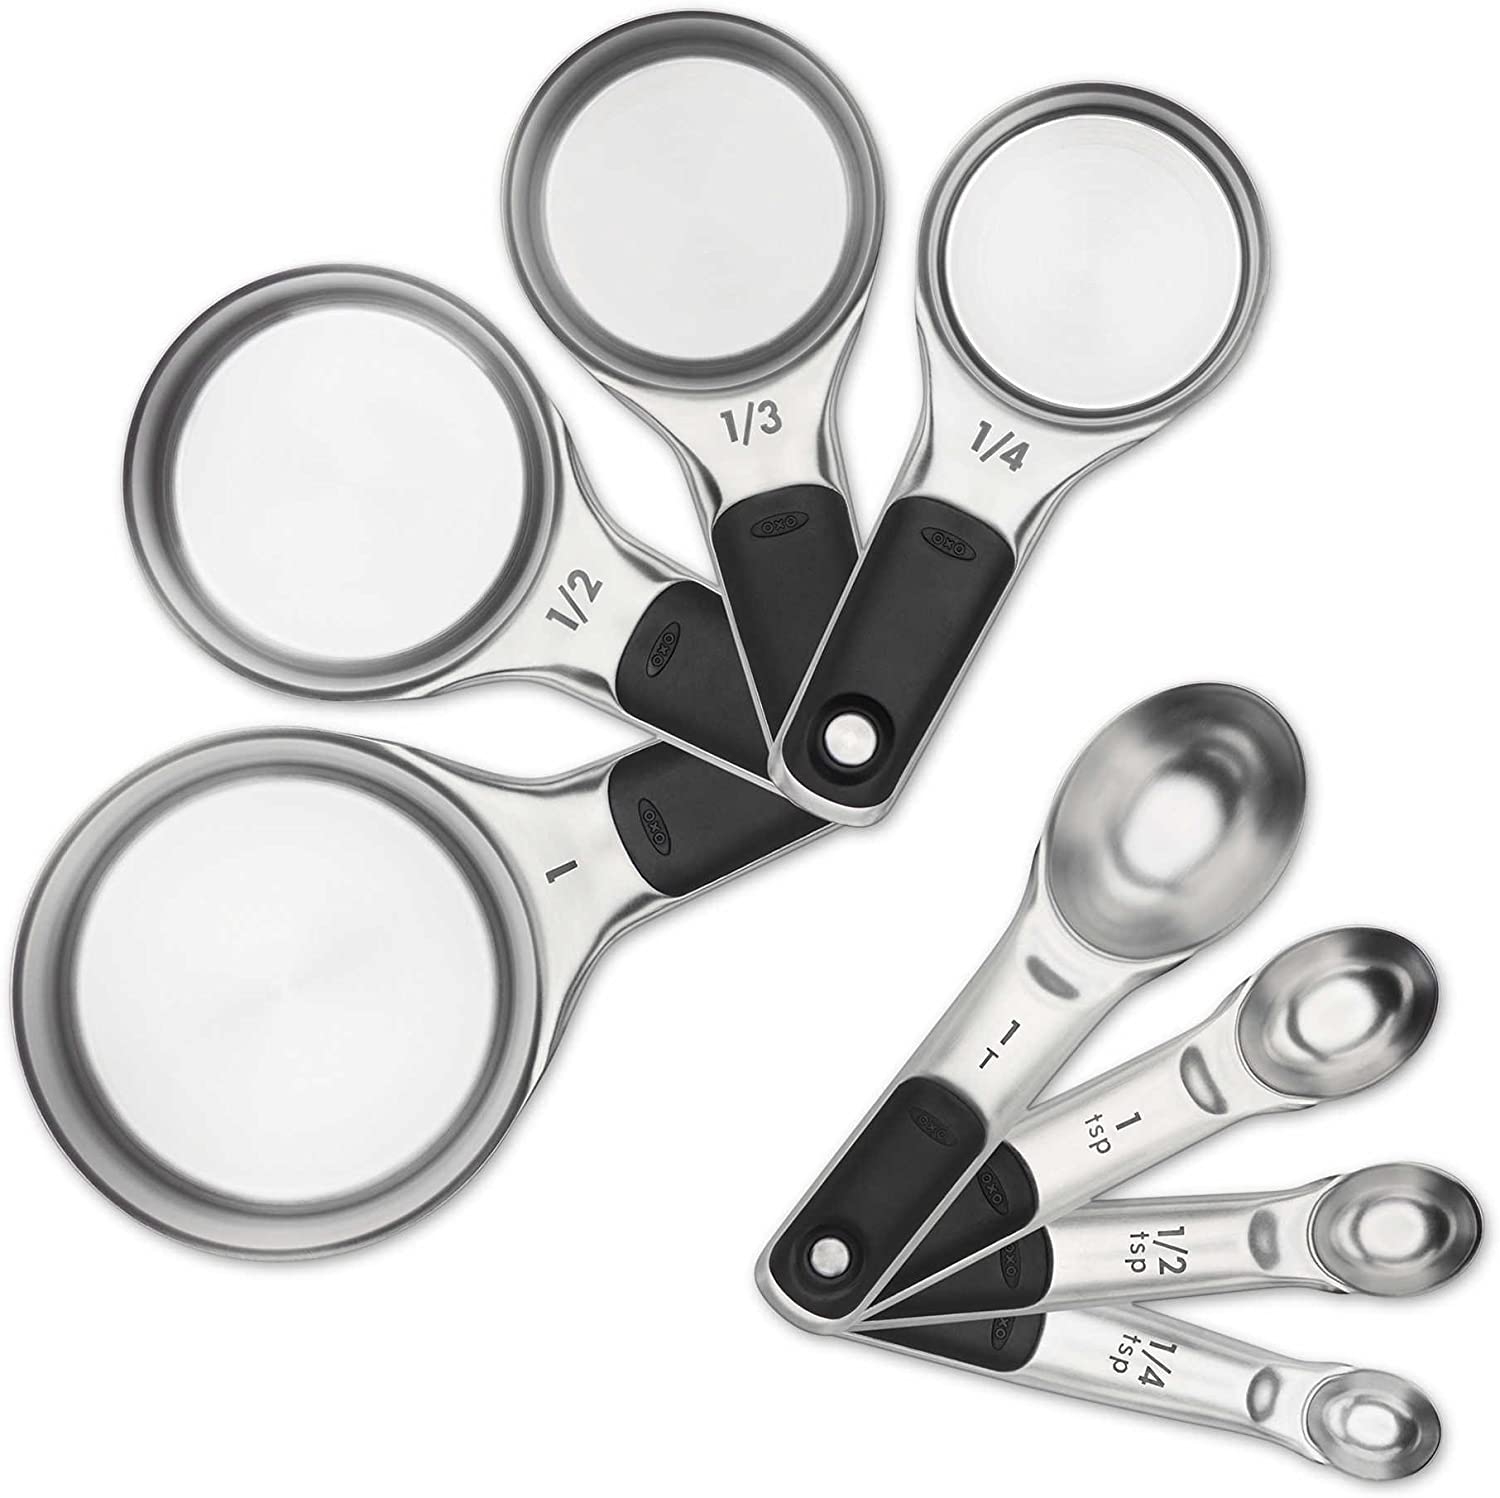 OXO 8-Piece Stainless Steel Measuring Cup/Spoon Set Import To Shop ×Product customization General Description Gallery Reviews